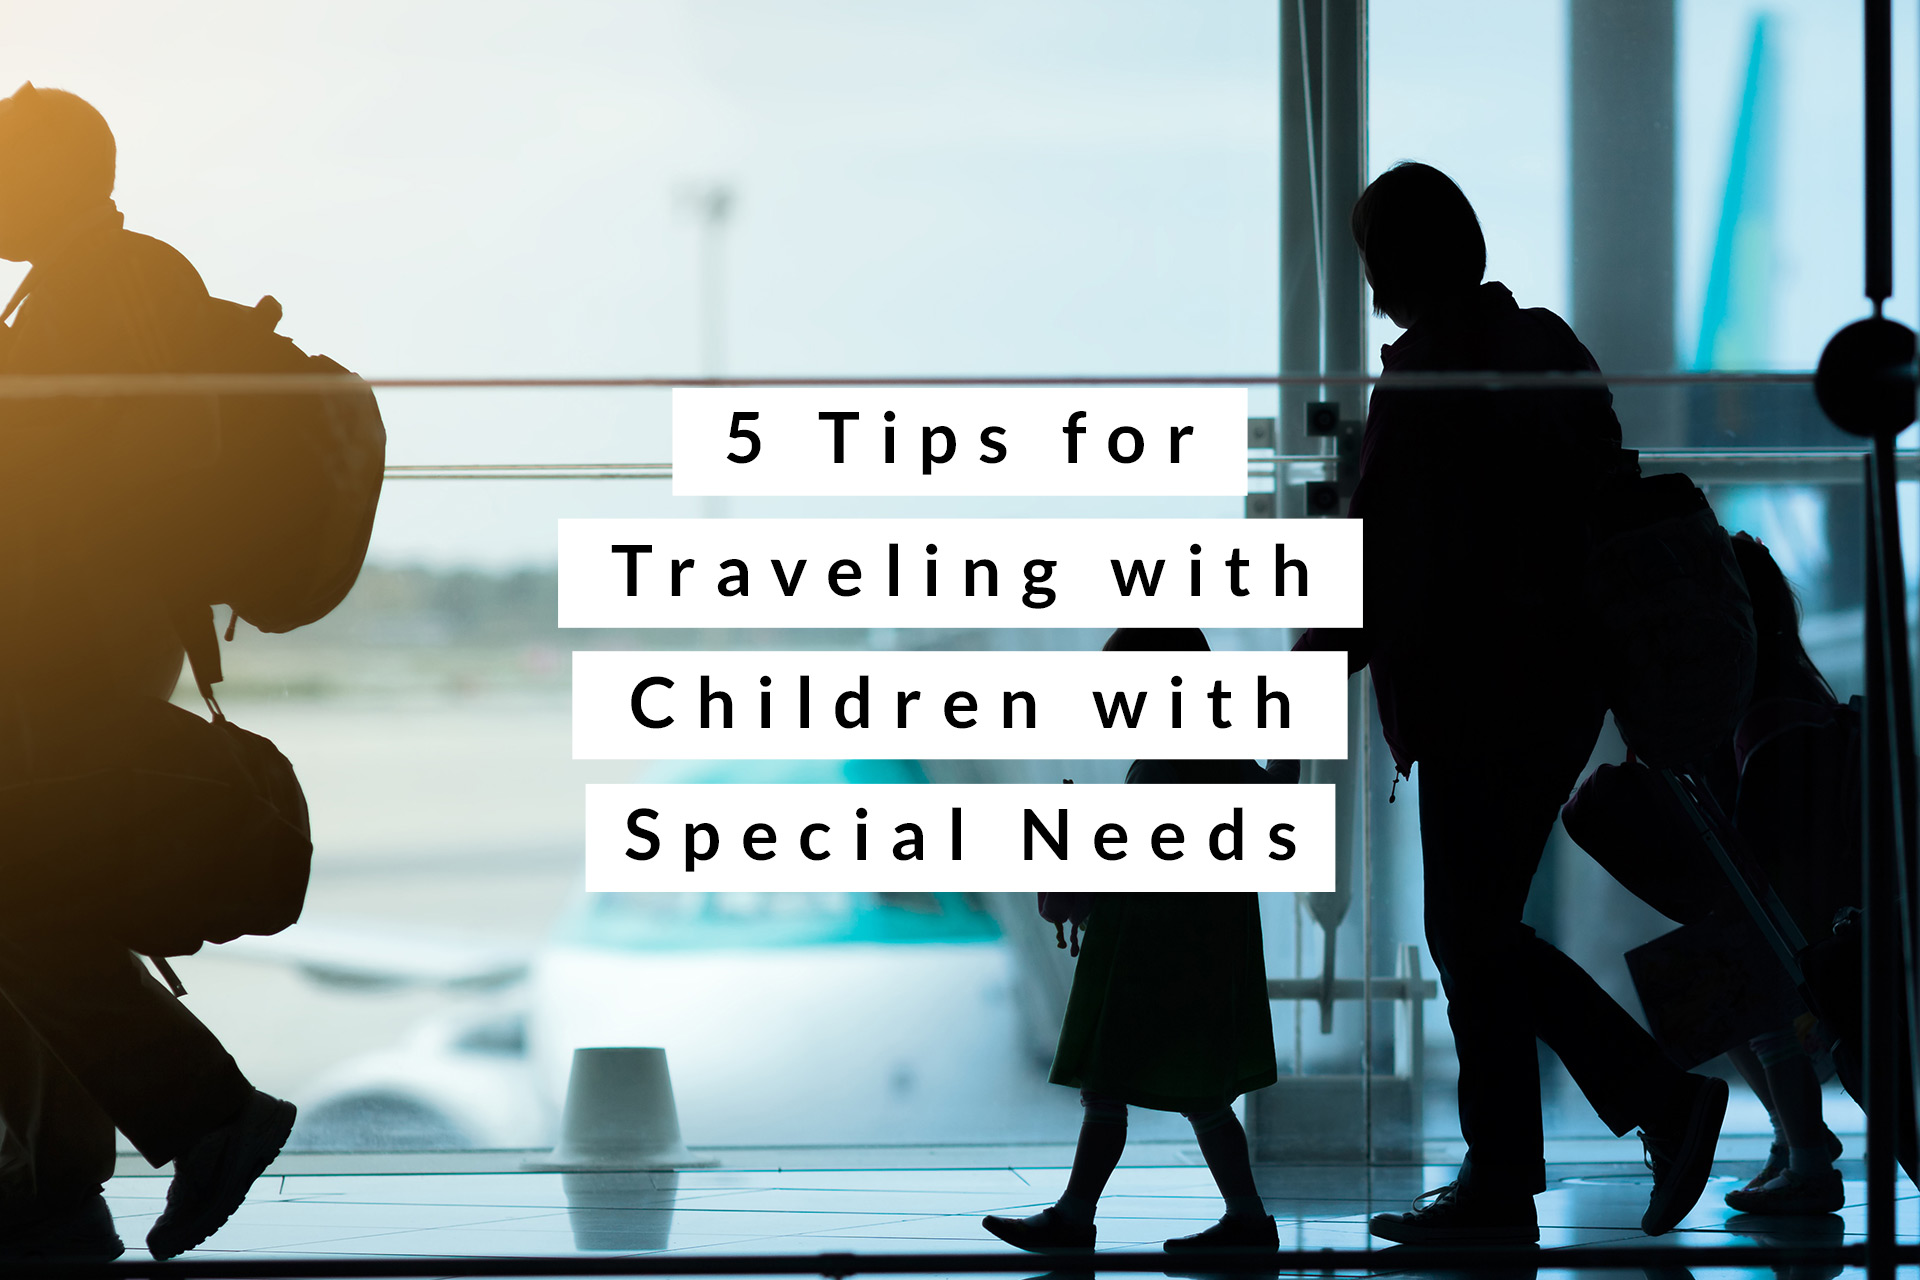 5 Tips for Traveling with Children with Special Needs